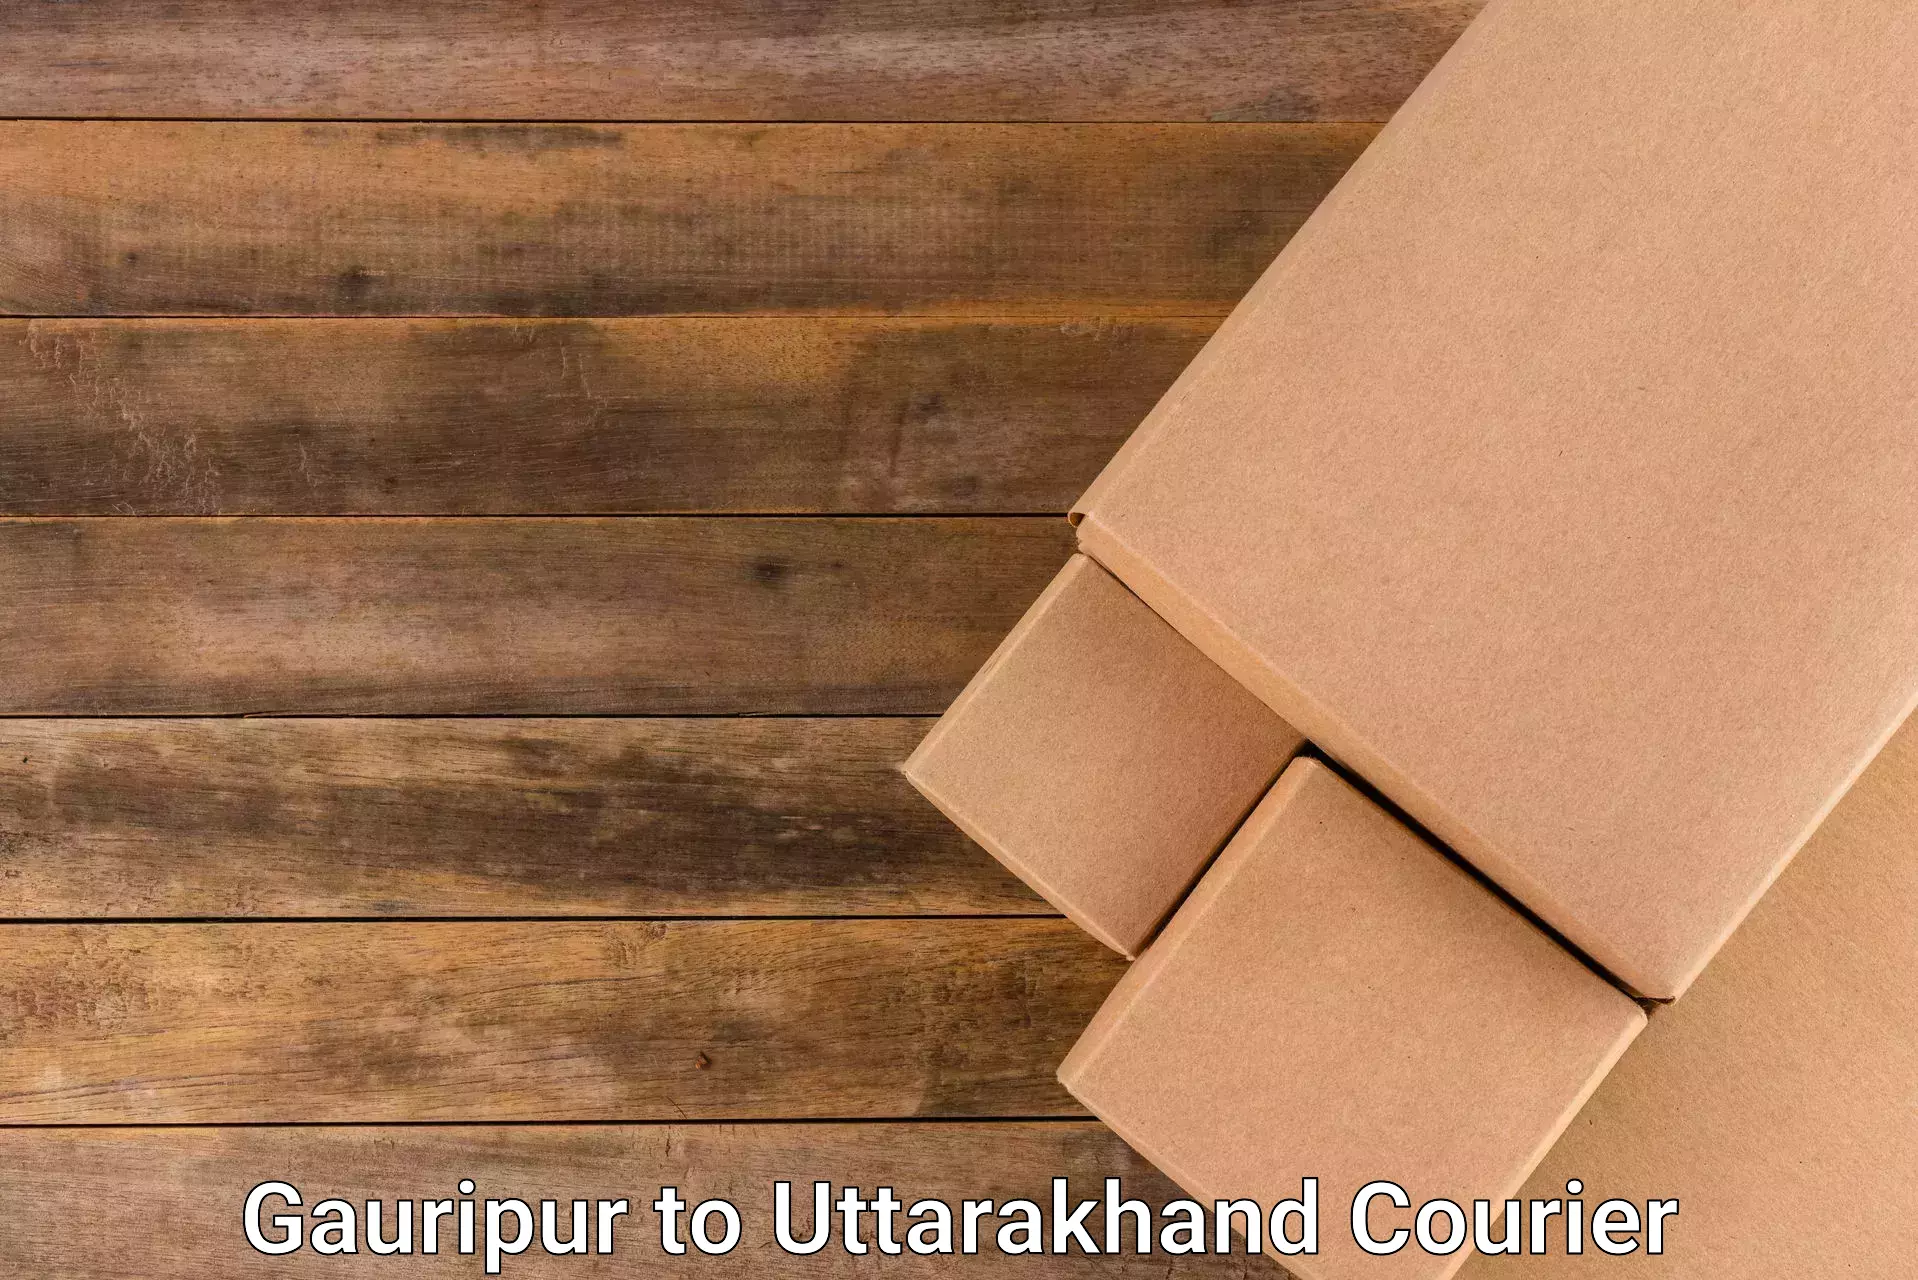 Express delivery capabilities Gauripur to Tehri